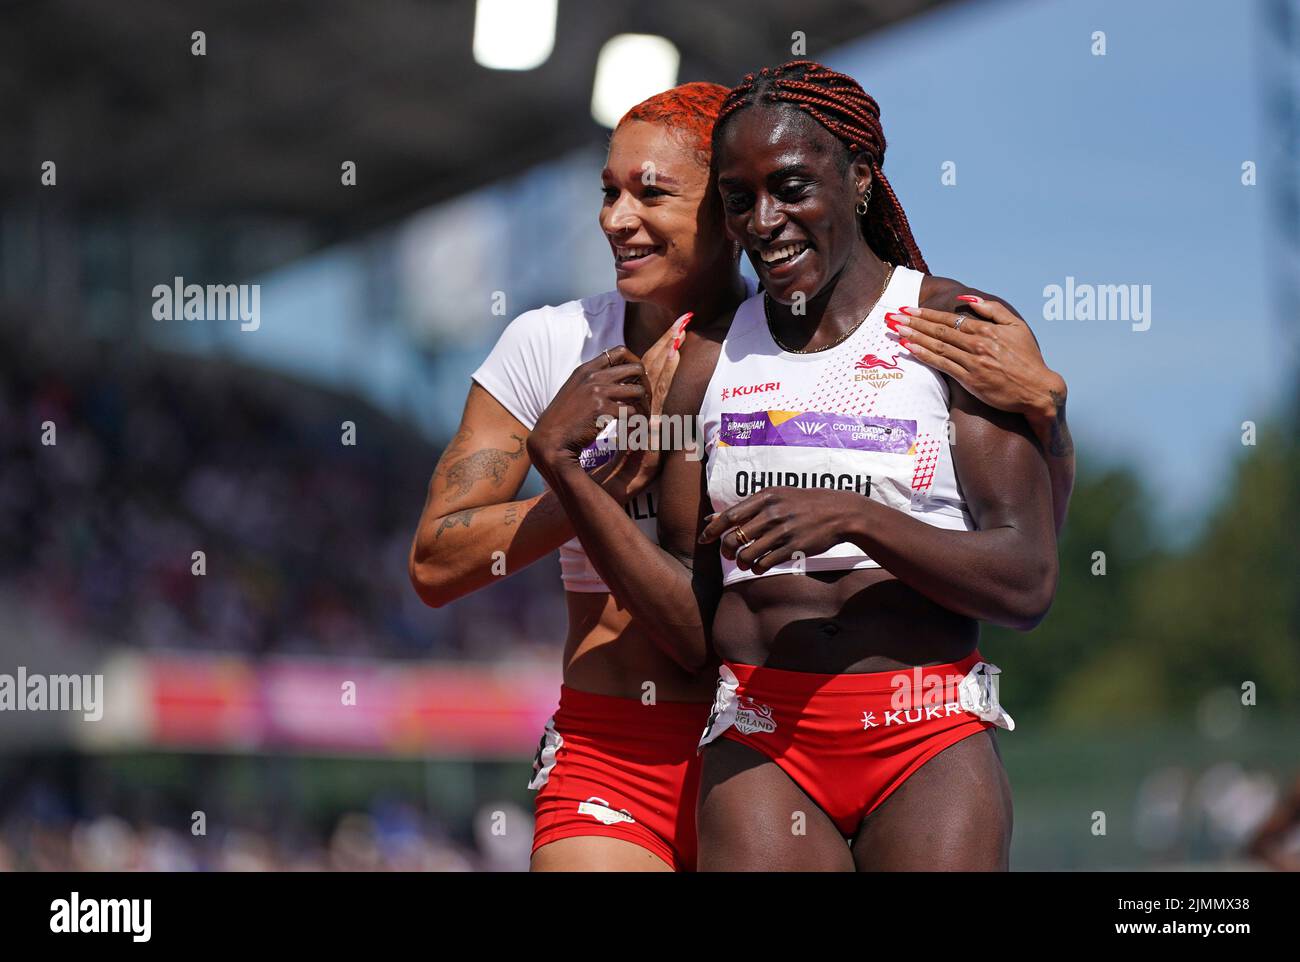 England's Victoria Ohuruogu (right) after winning silver, celebrates with Jodie Williams, who won bronze, after the Women's 400m Final at Alexander Stadium on day ten of the 2022 Commonwealth Games in Birmingham. Picture date: Sunday August 7, 2022. Stock Photo